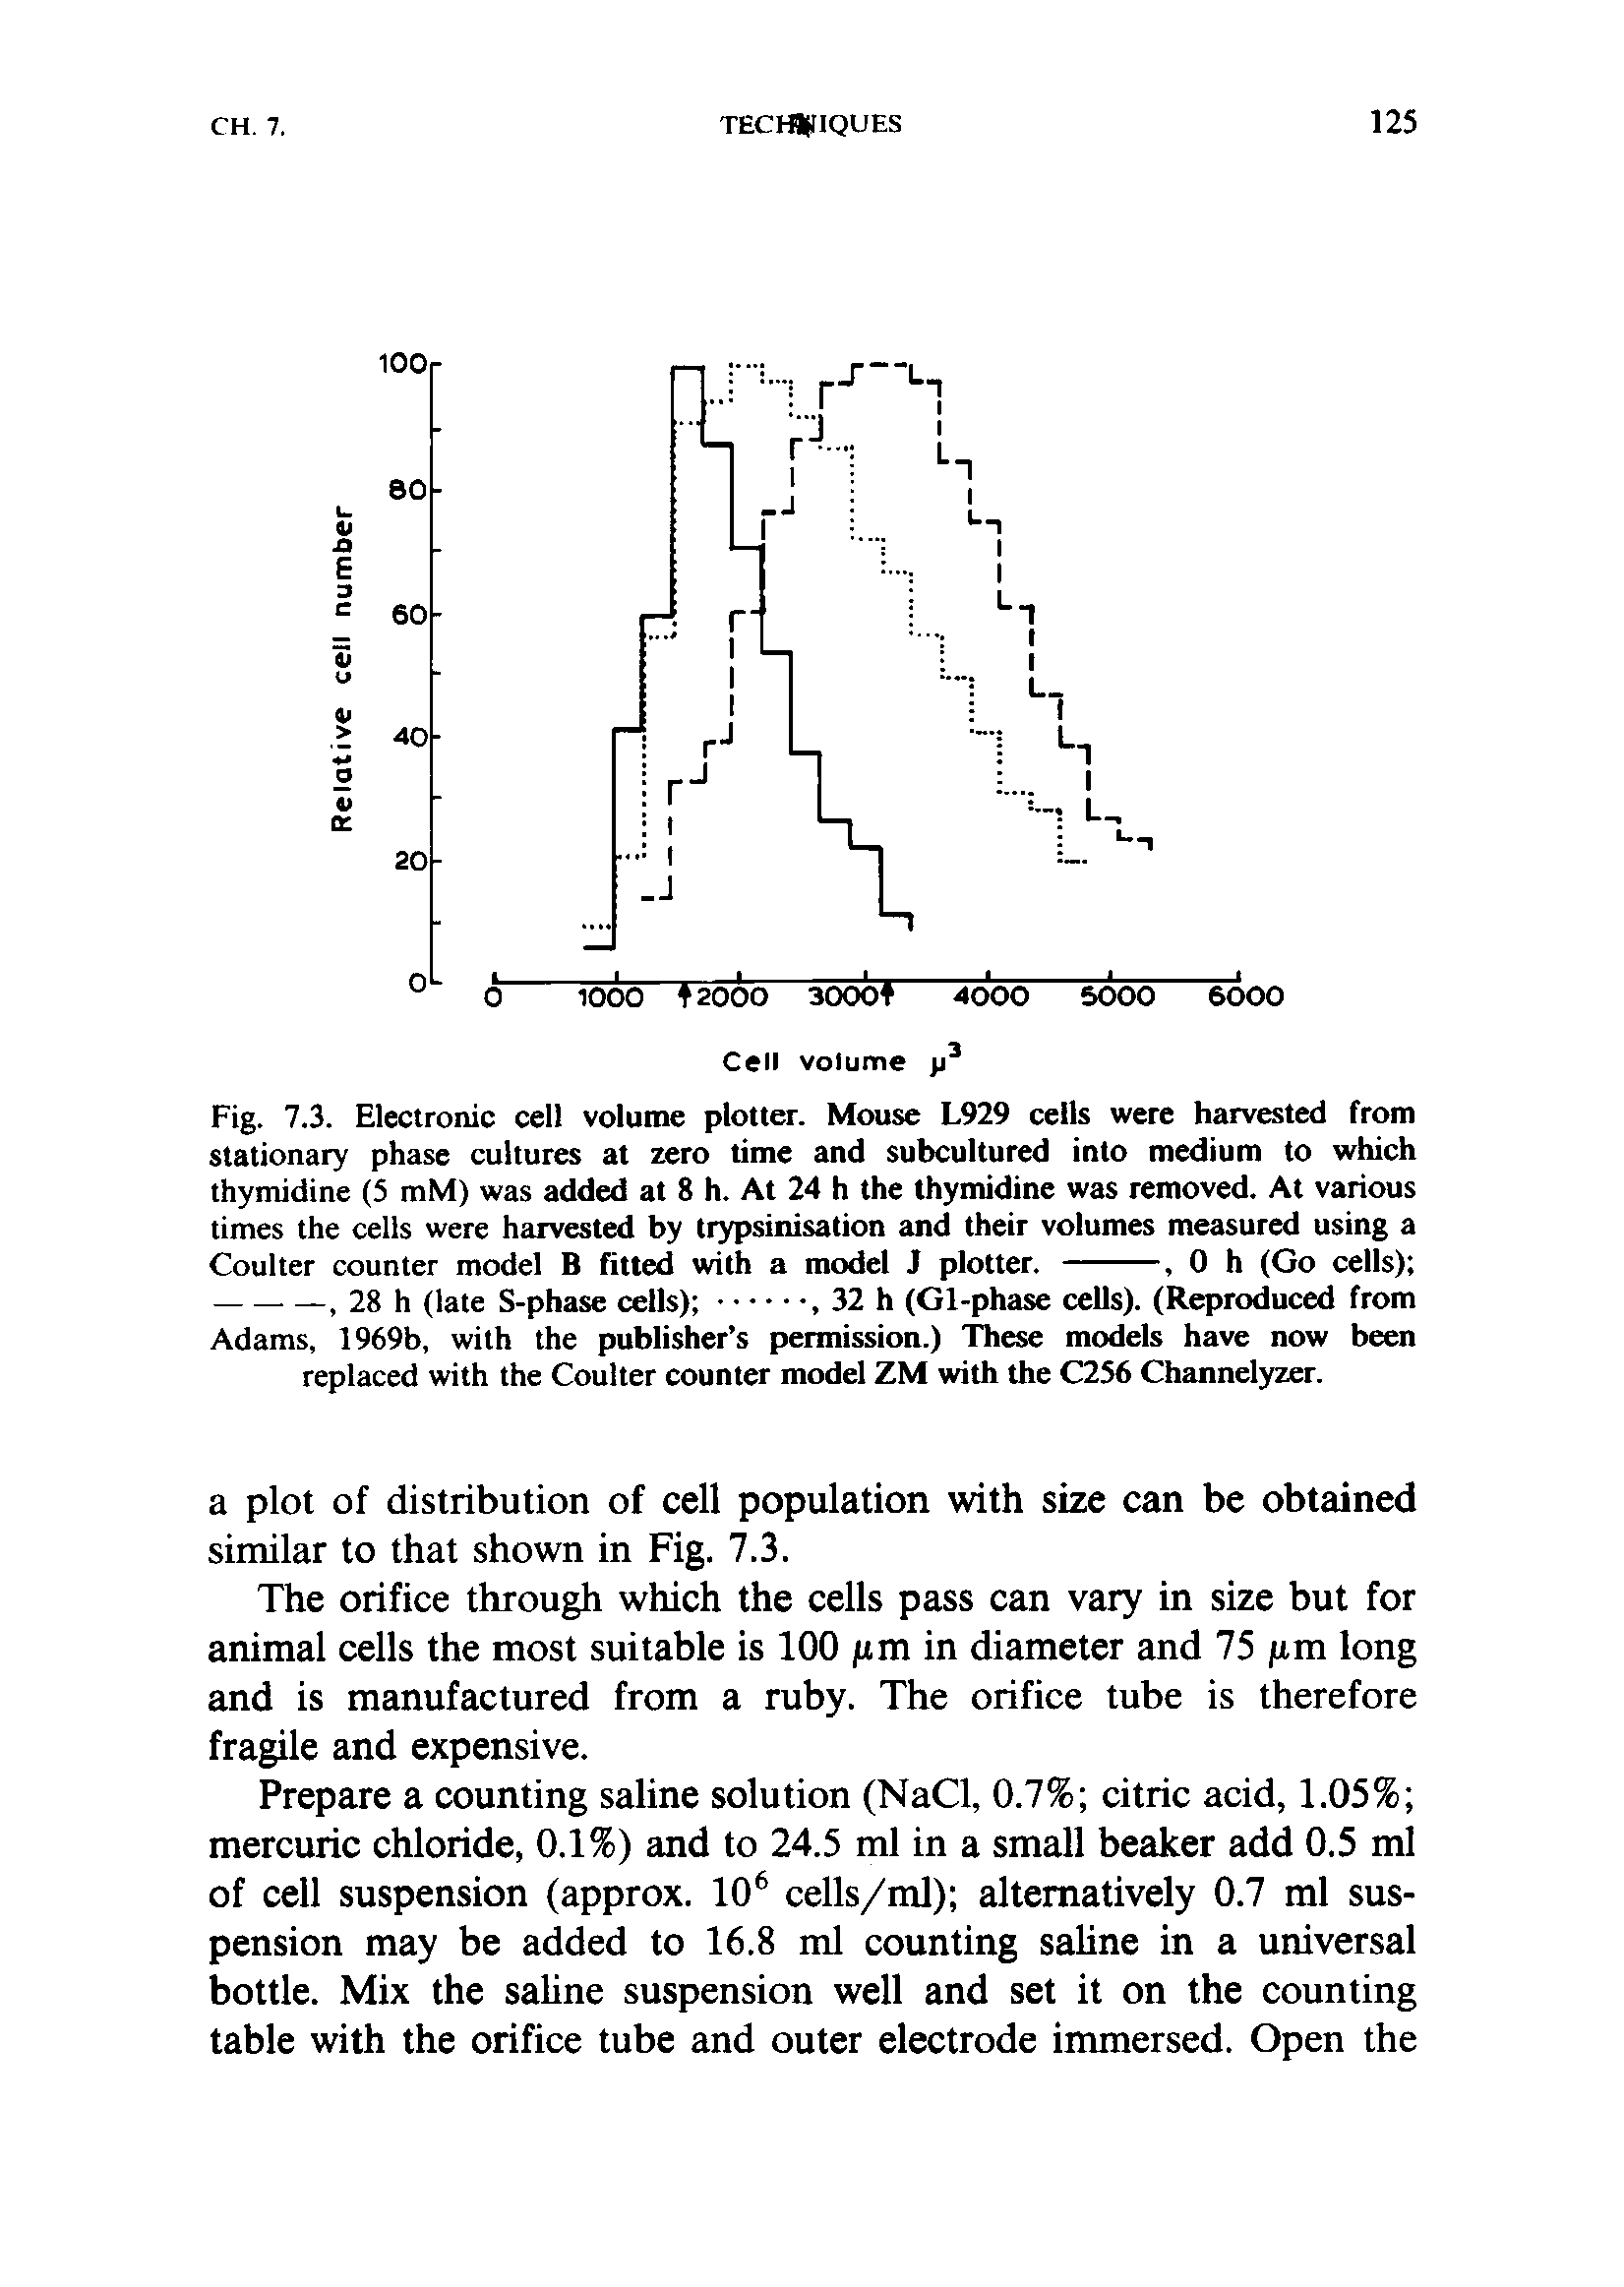 Fig. 7.3. Electronic cell volume plotter. Mouse L929 cells were harvested from stationary phase cultures at zero time and subcultured into medium to which thymidine (5 mM) was added at 8 h. At 24 h the thymidine was removed. At various times the cells were harvested by trypsinisation and their volumes measured using a...